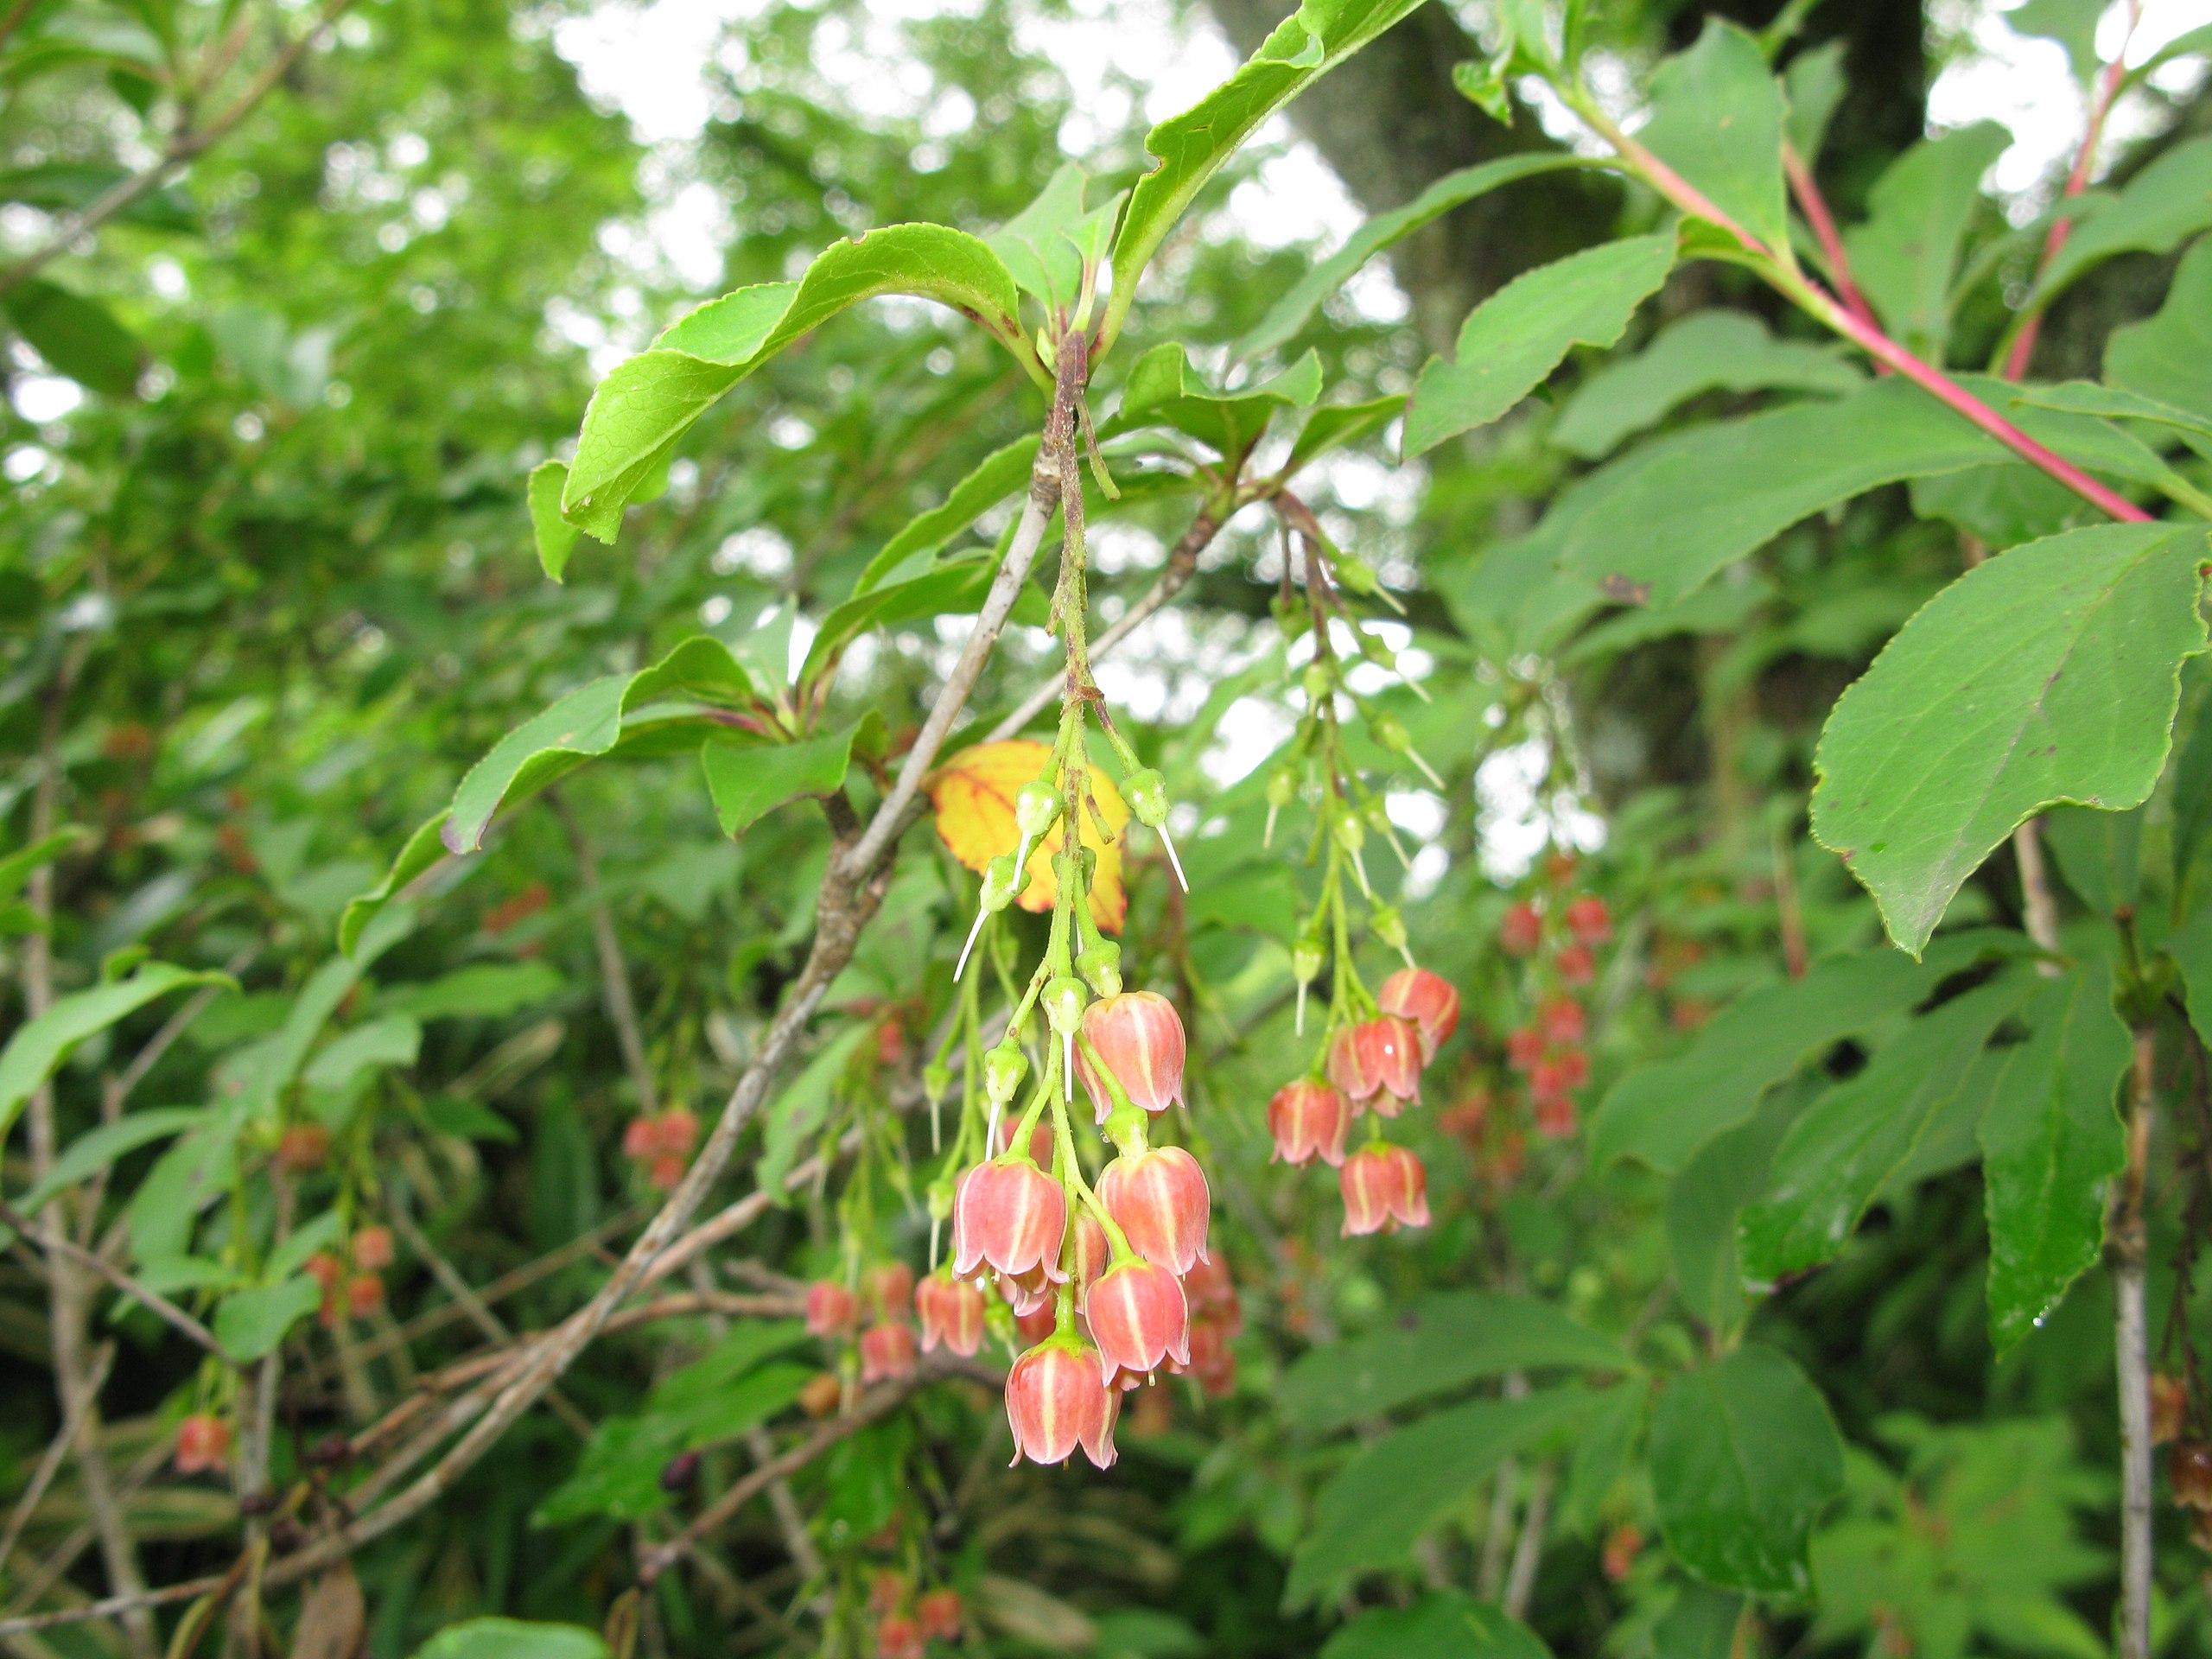 red-white flowers with lime petioles, gray-brown branches and green leaves